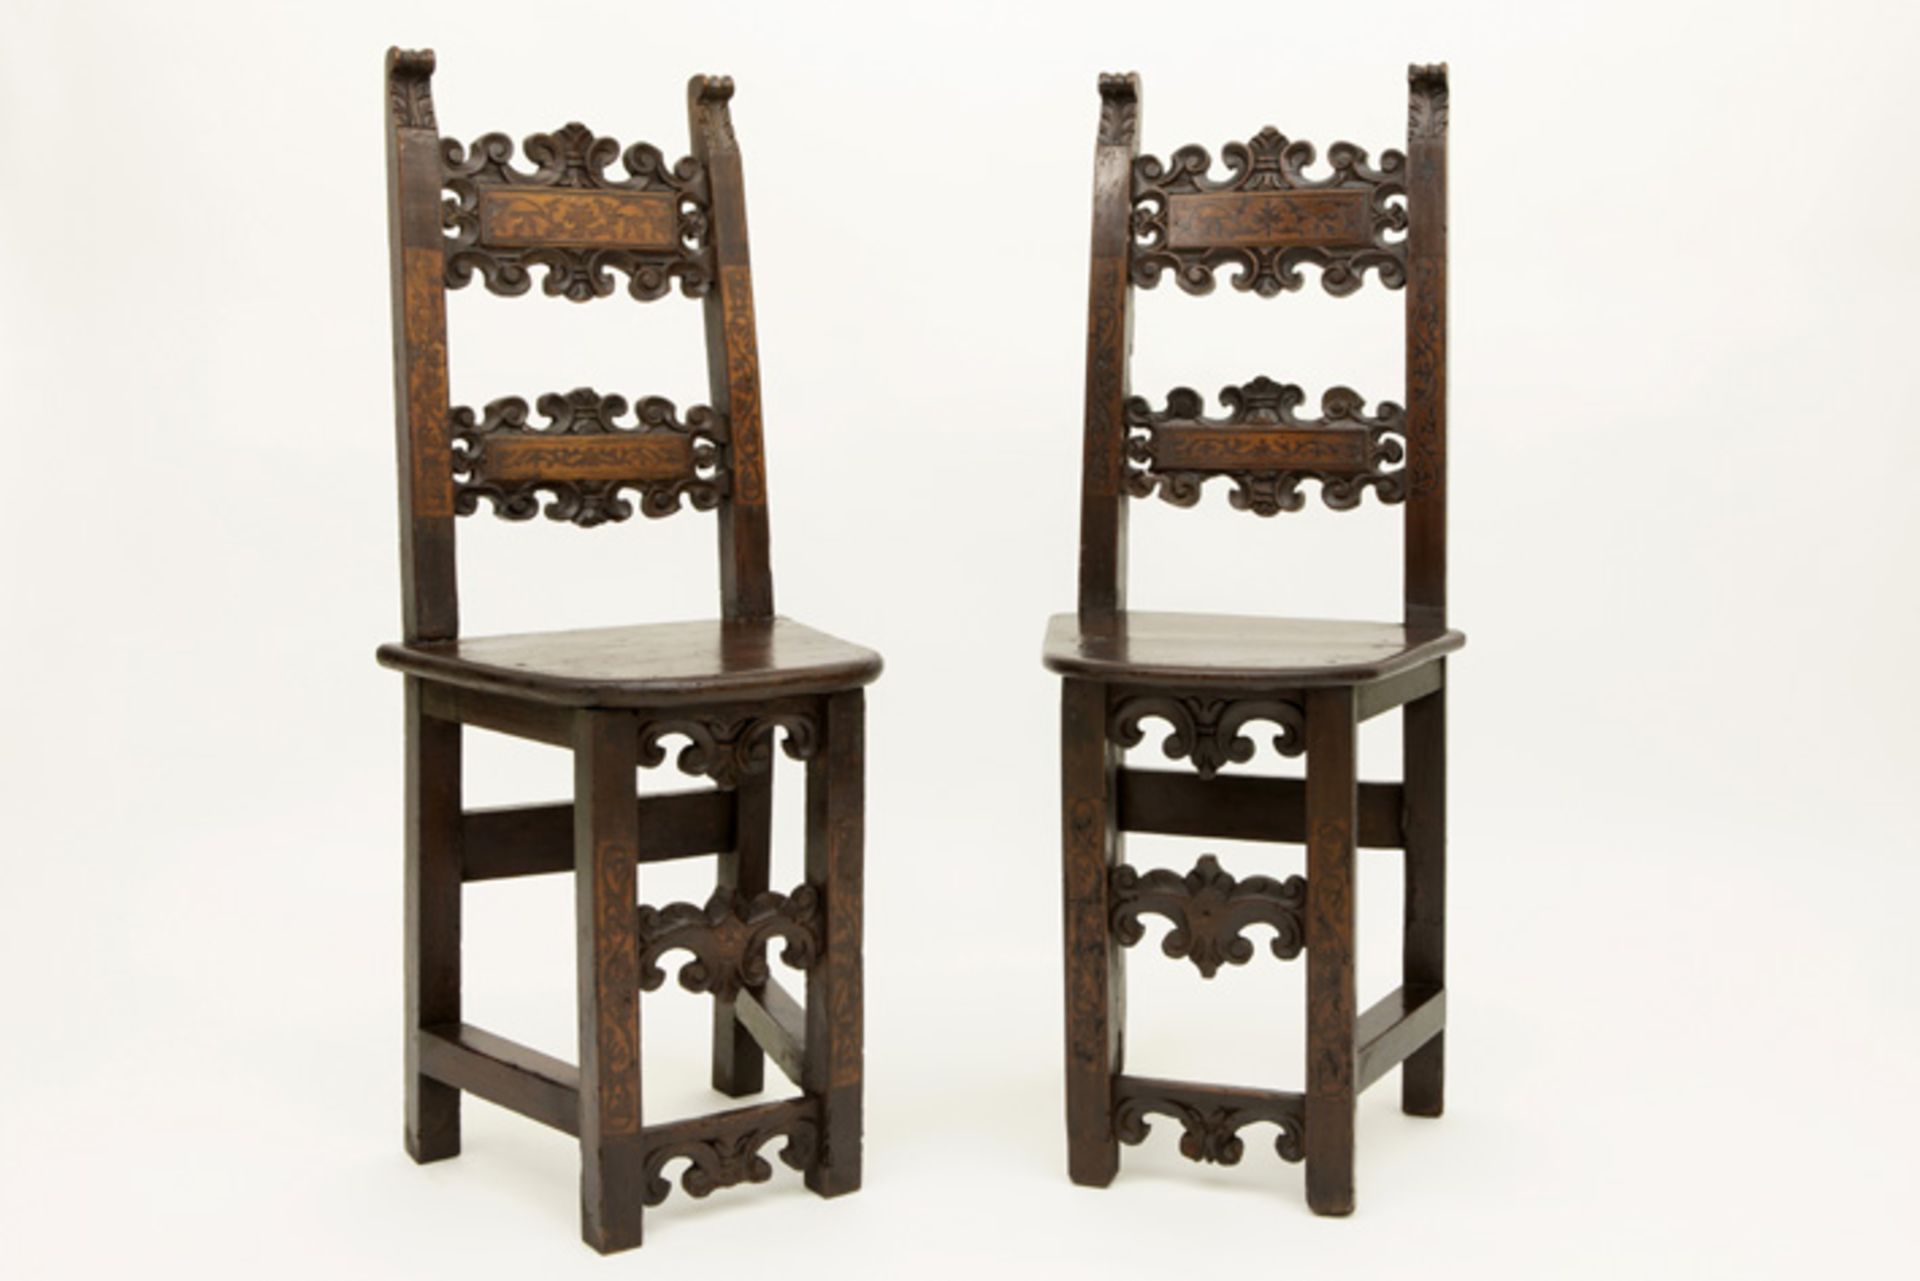 pair of 17th Cent. Italian chairs in walnut adorned with sculptures and inlay || ITALIË - 17° EEUW